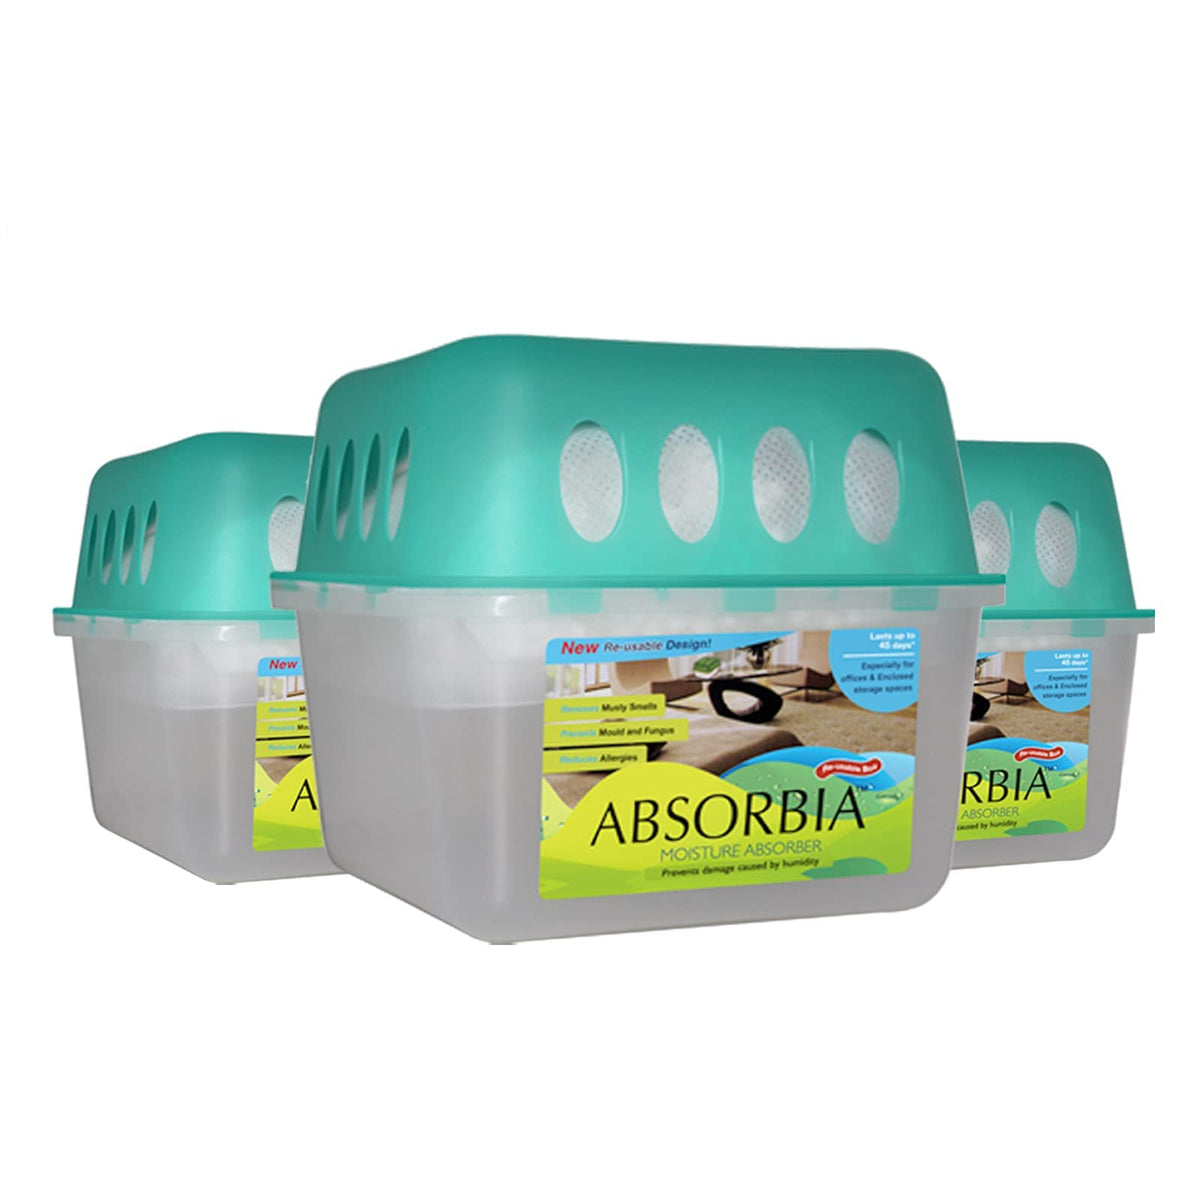 Absorbia Moisture Absorber | Absorbia Reusable Box w/Refill - Pack of 6 (800ml) | Dehumidifier for Basement, Storerooms, Spare Rooms Lofts | Fights Against Moisture, Mould, Fungus Musty Smells